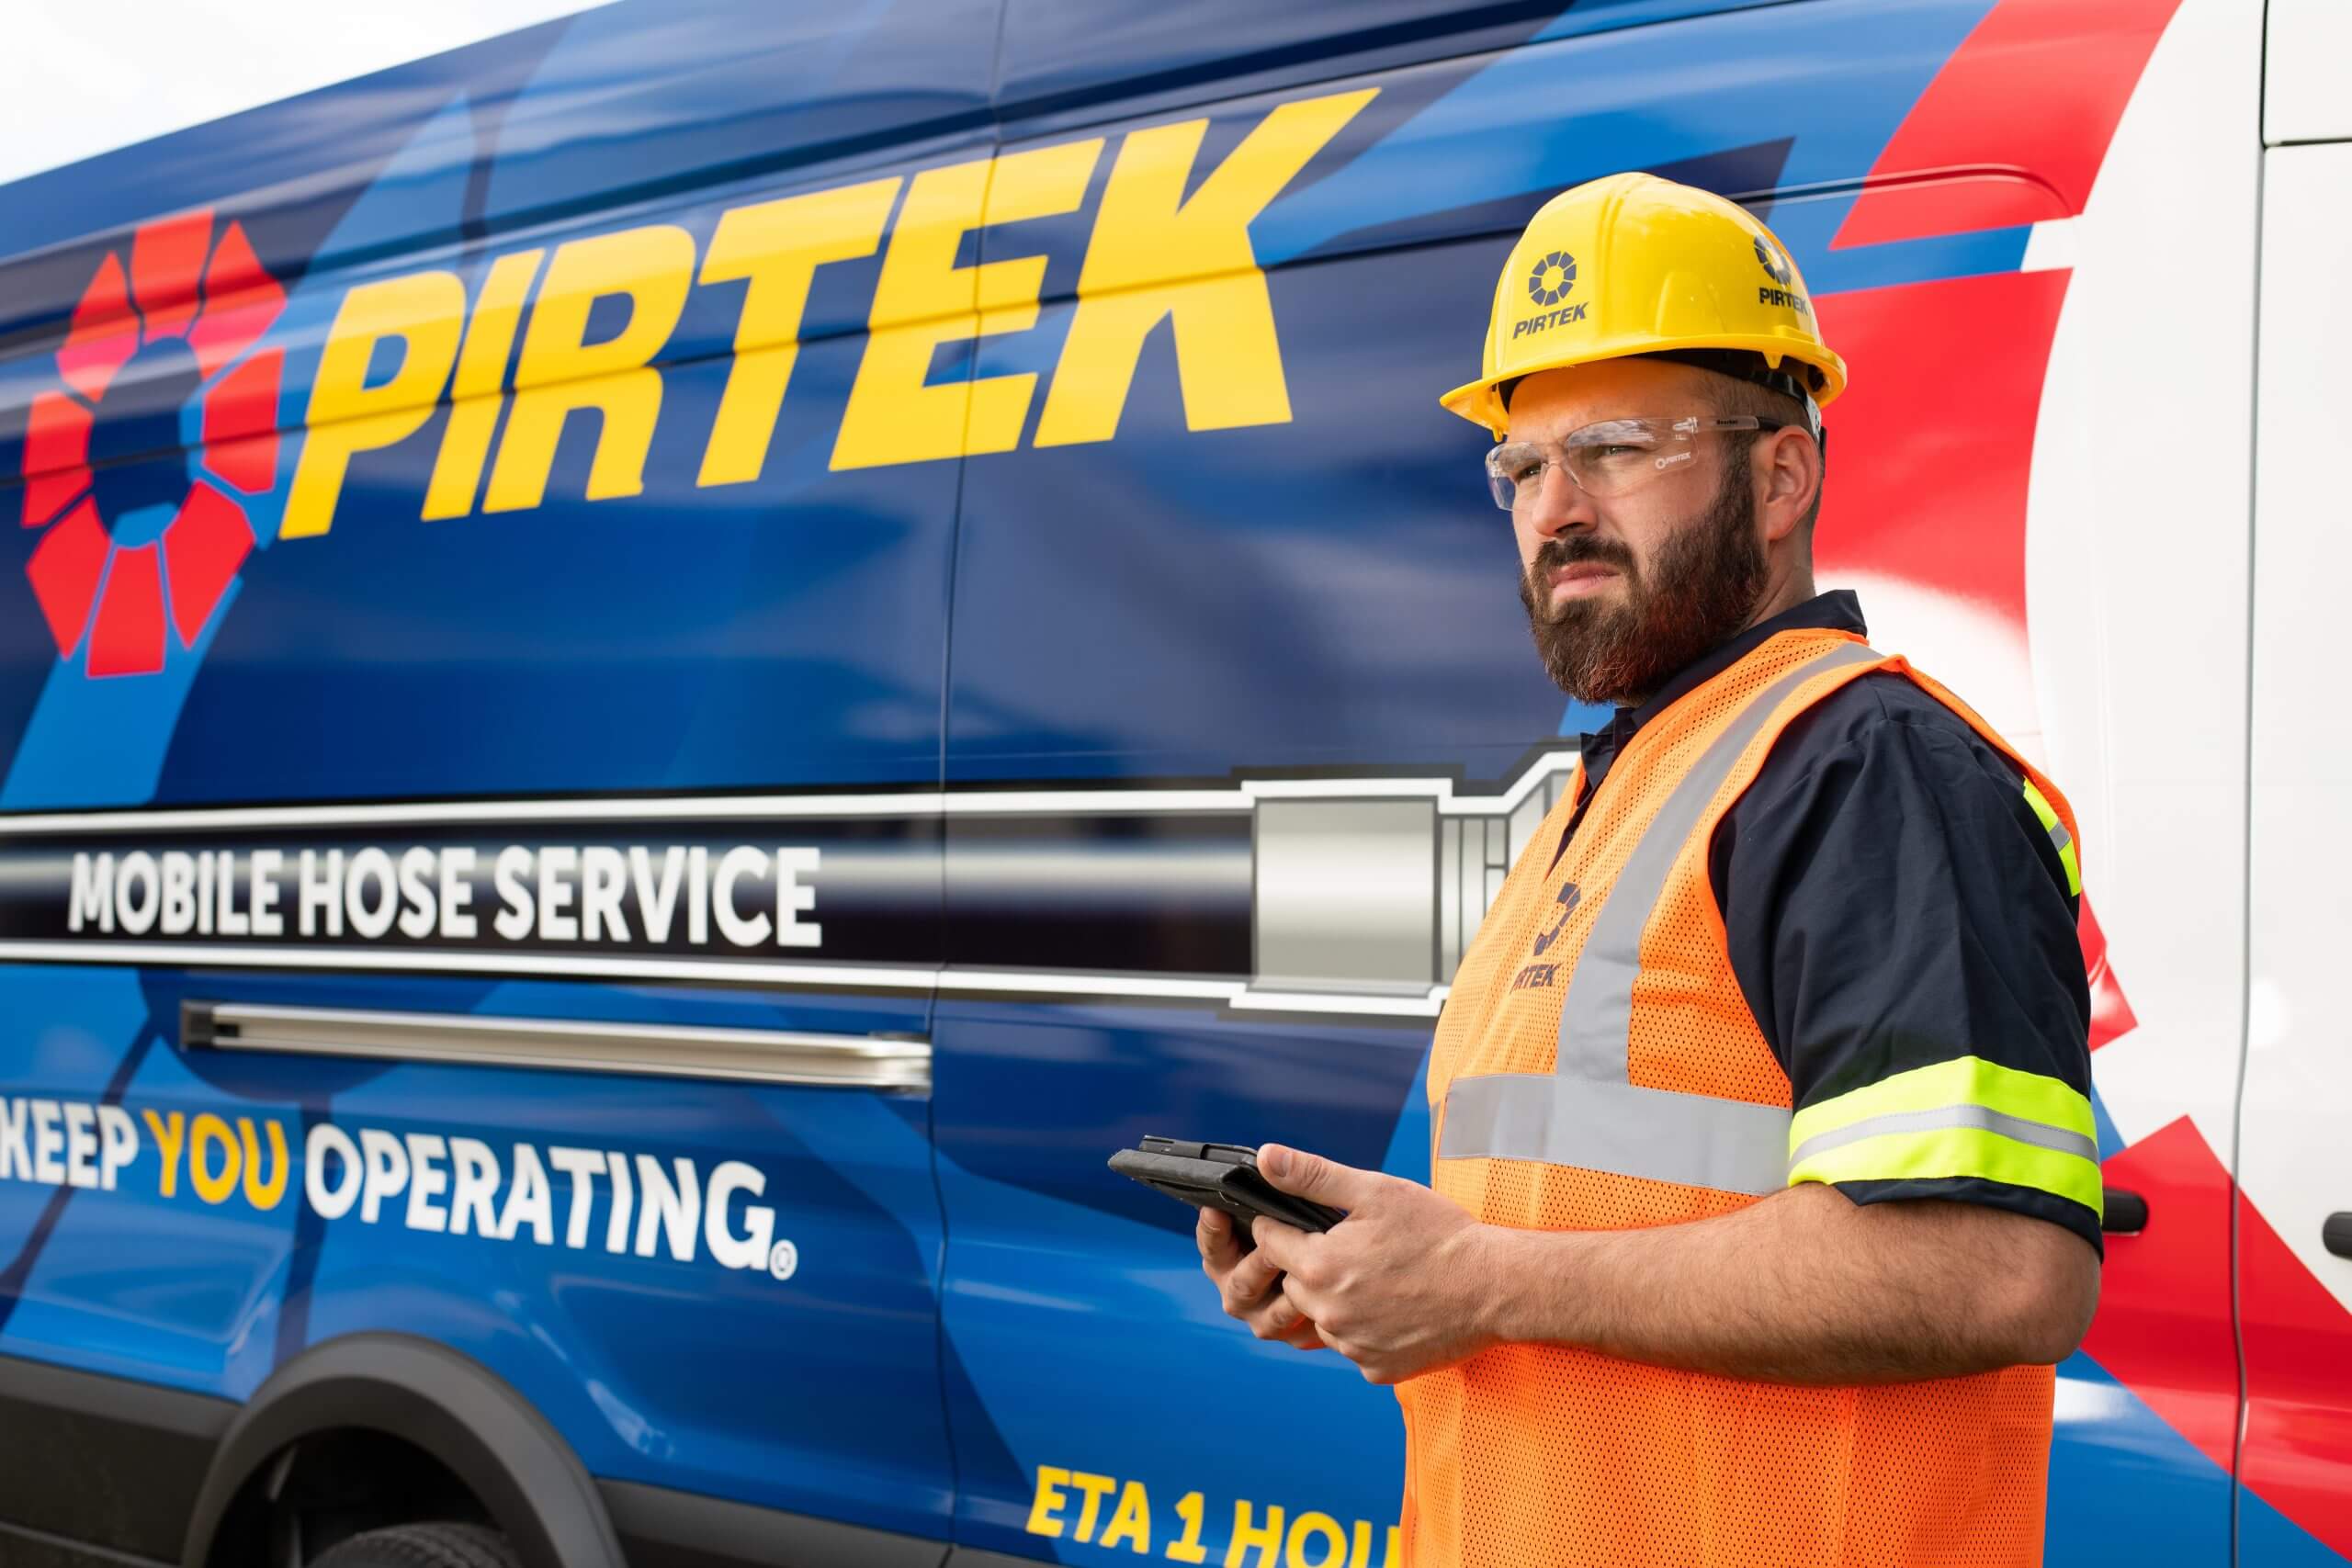 Discover the Benefits of Owning a PIRTEK Hydraulic and Industrial Hose Service Franchise.